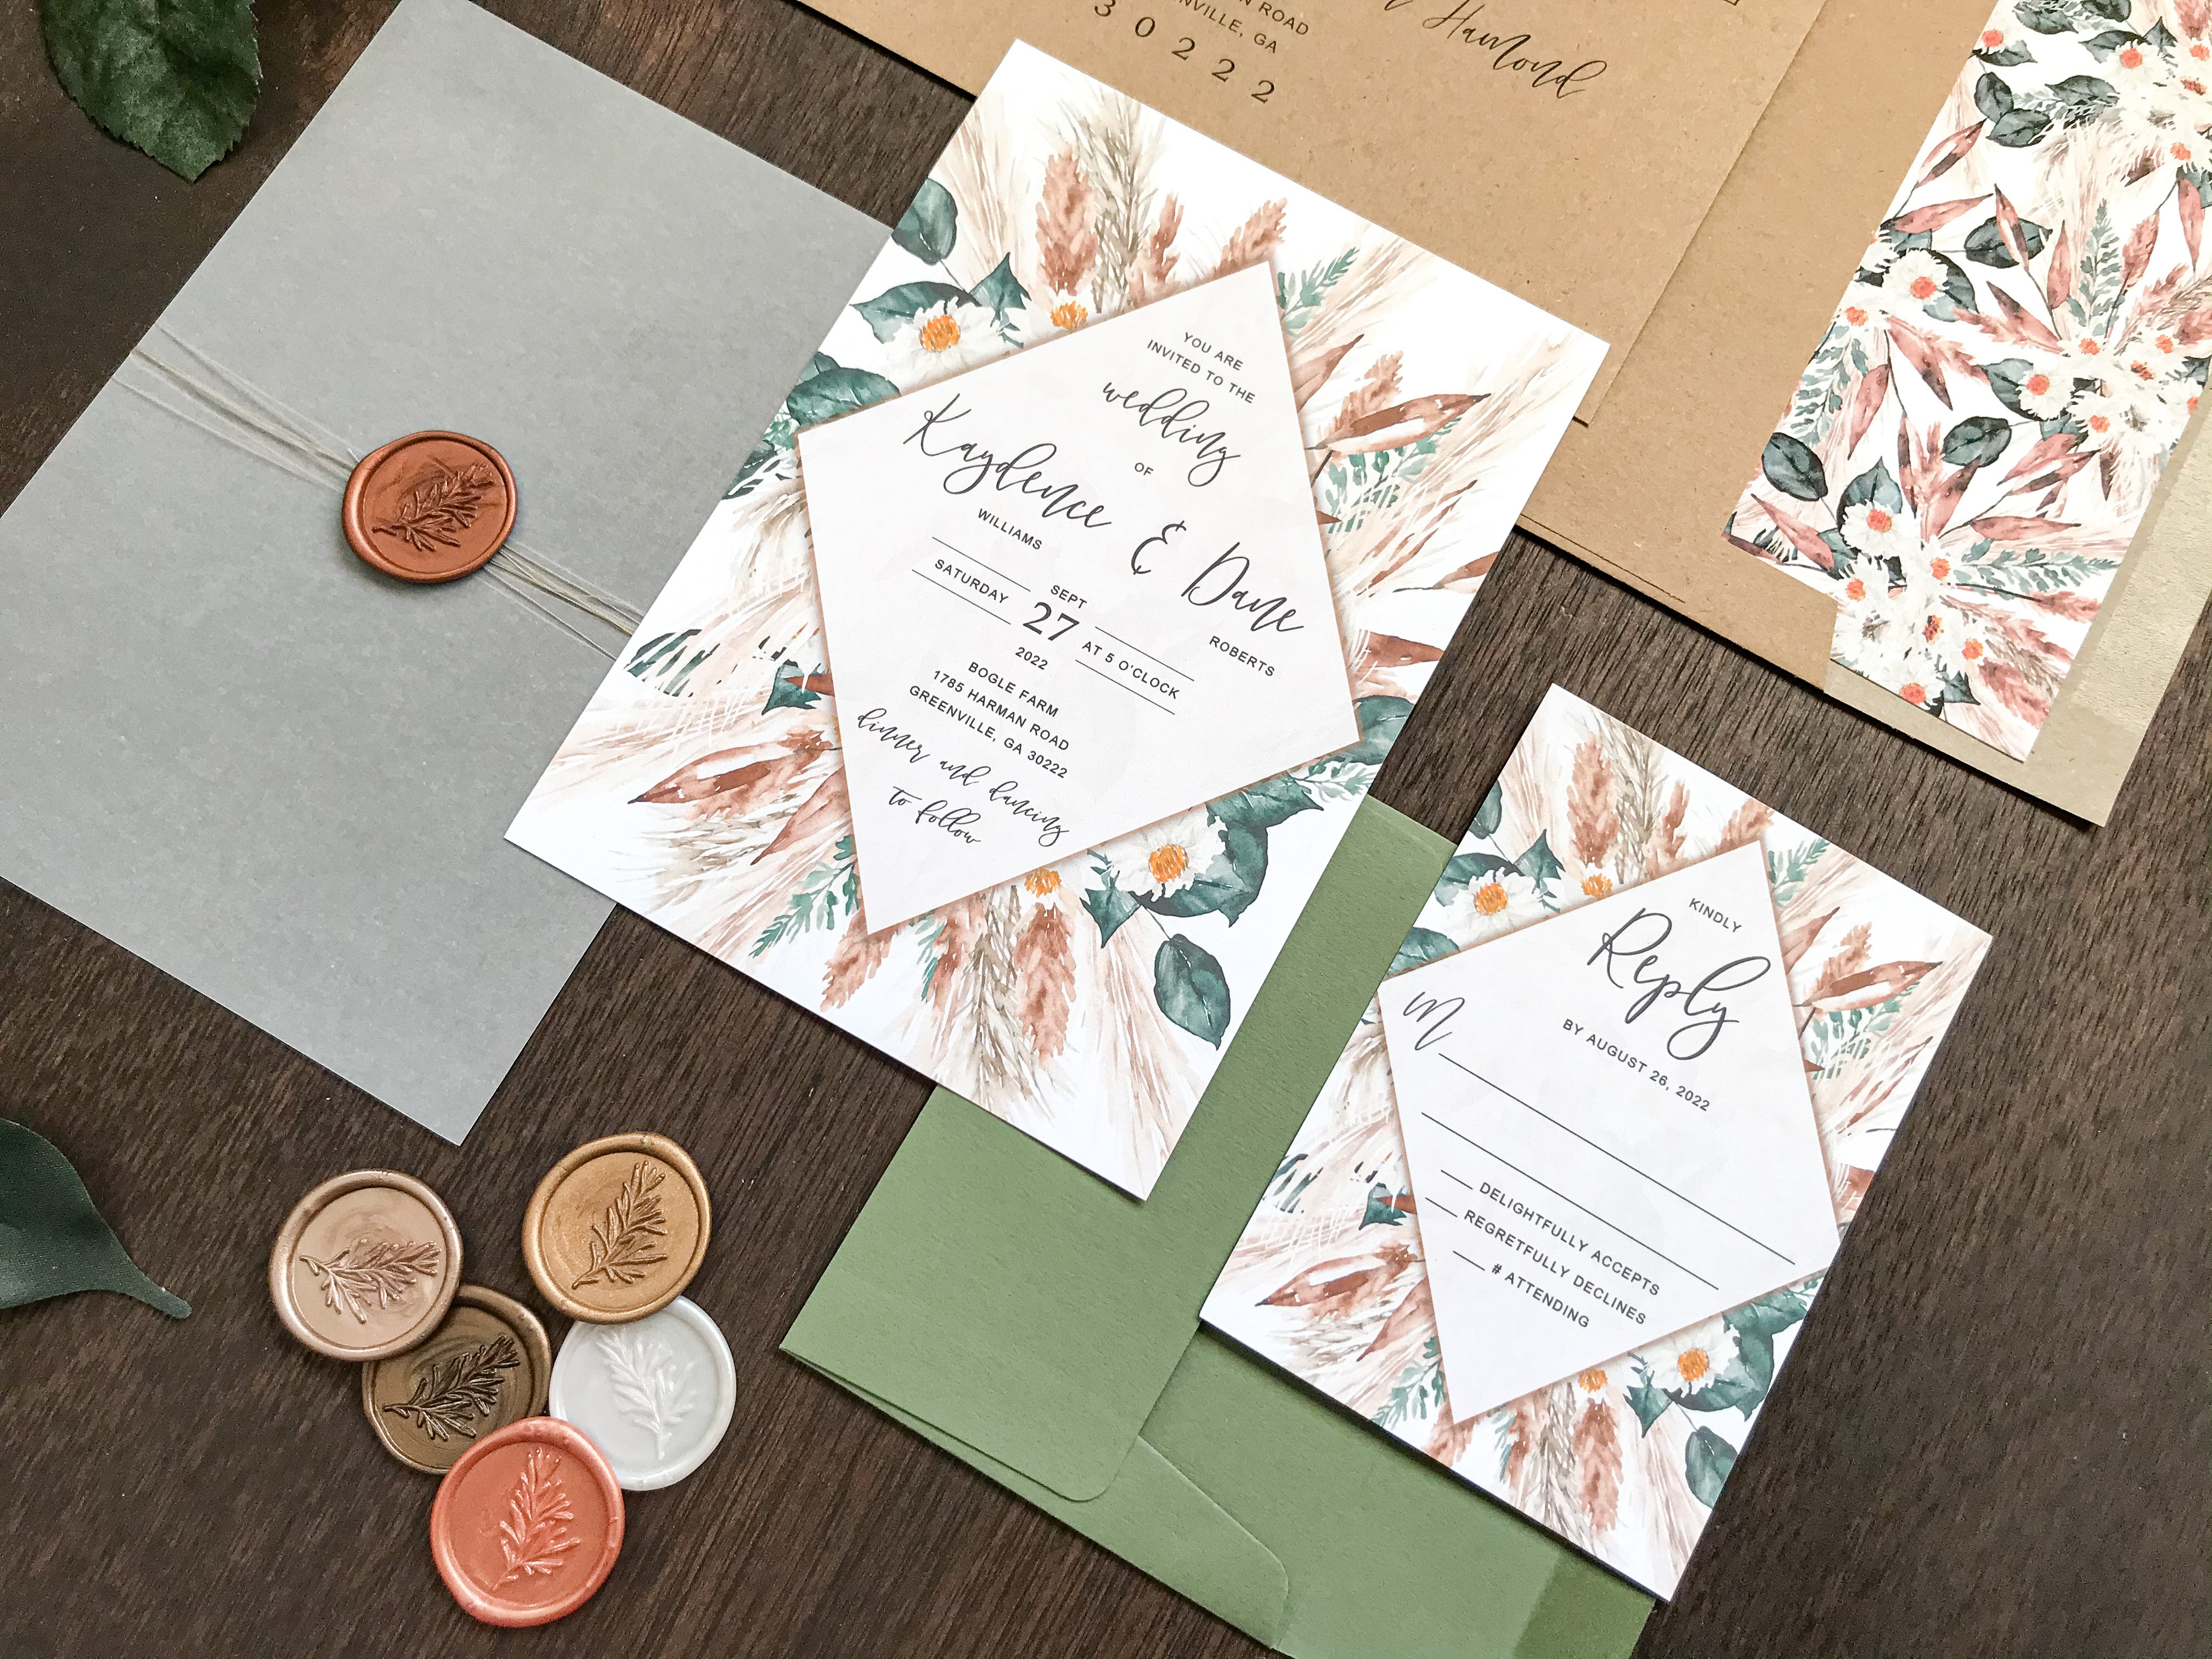 Boho Wedding Invitation with Vellum Cover, Wax Seal, Pampas Grass, White Flowers and Copper Foliage